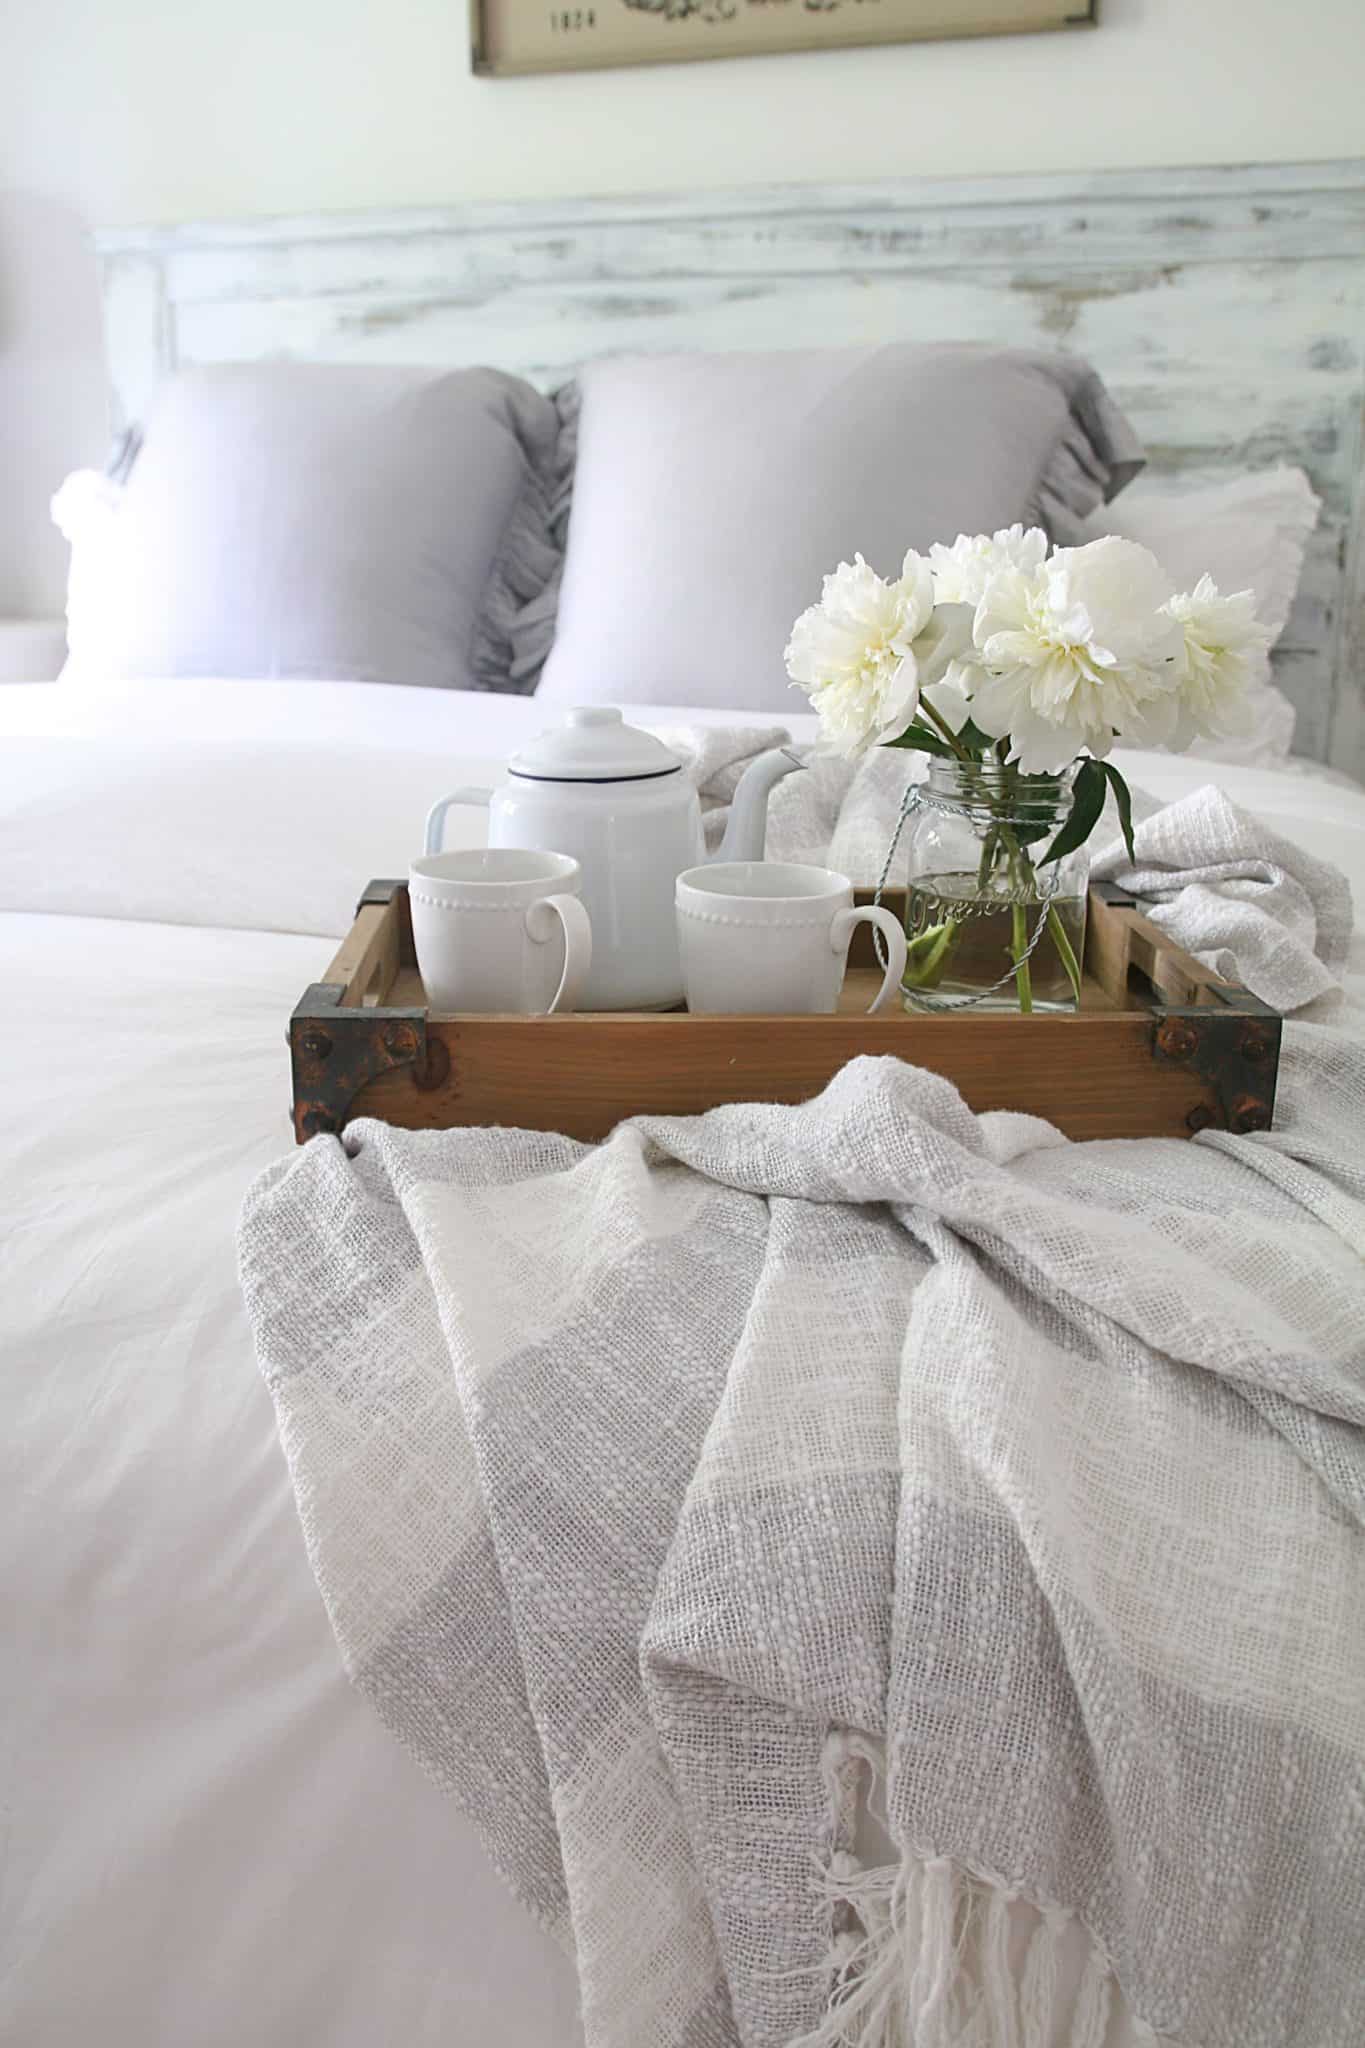 Soothing White Bedrooms With a Twist